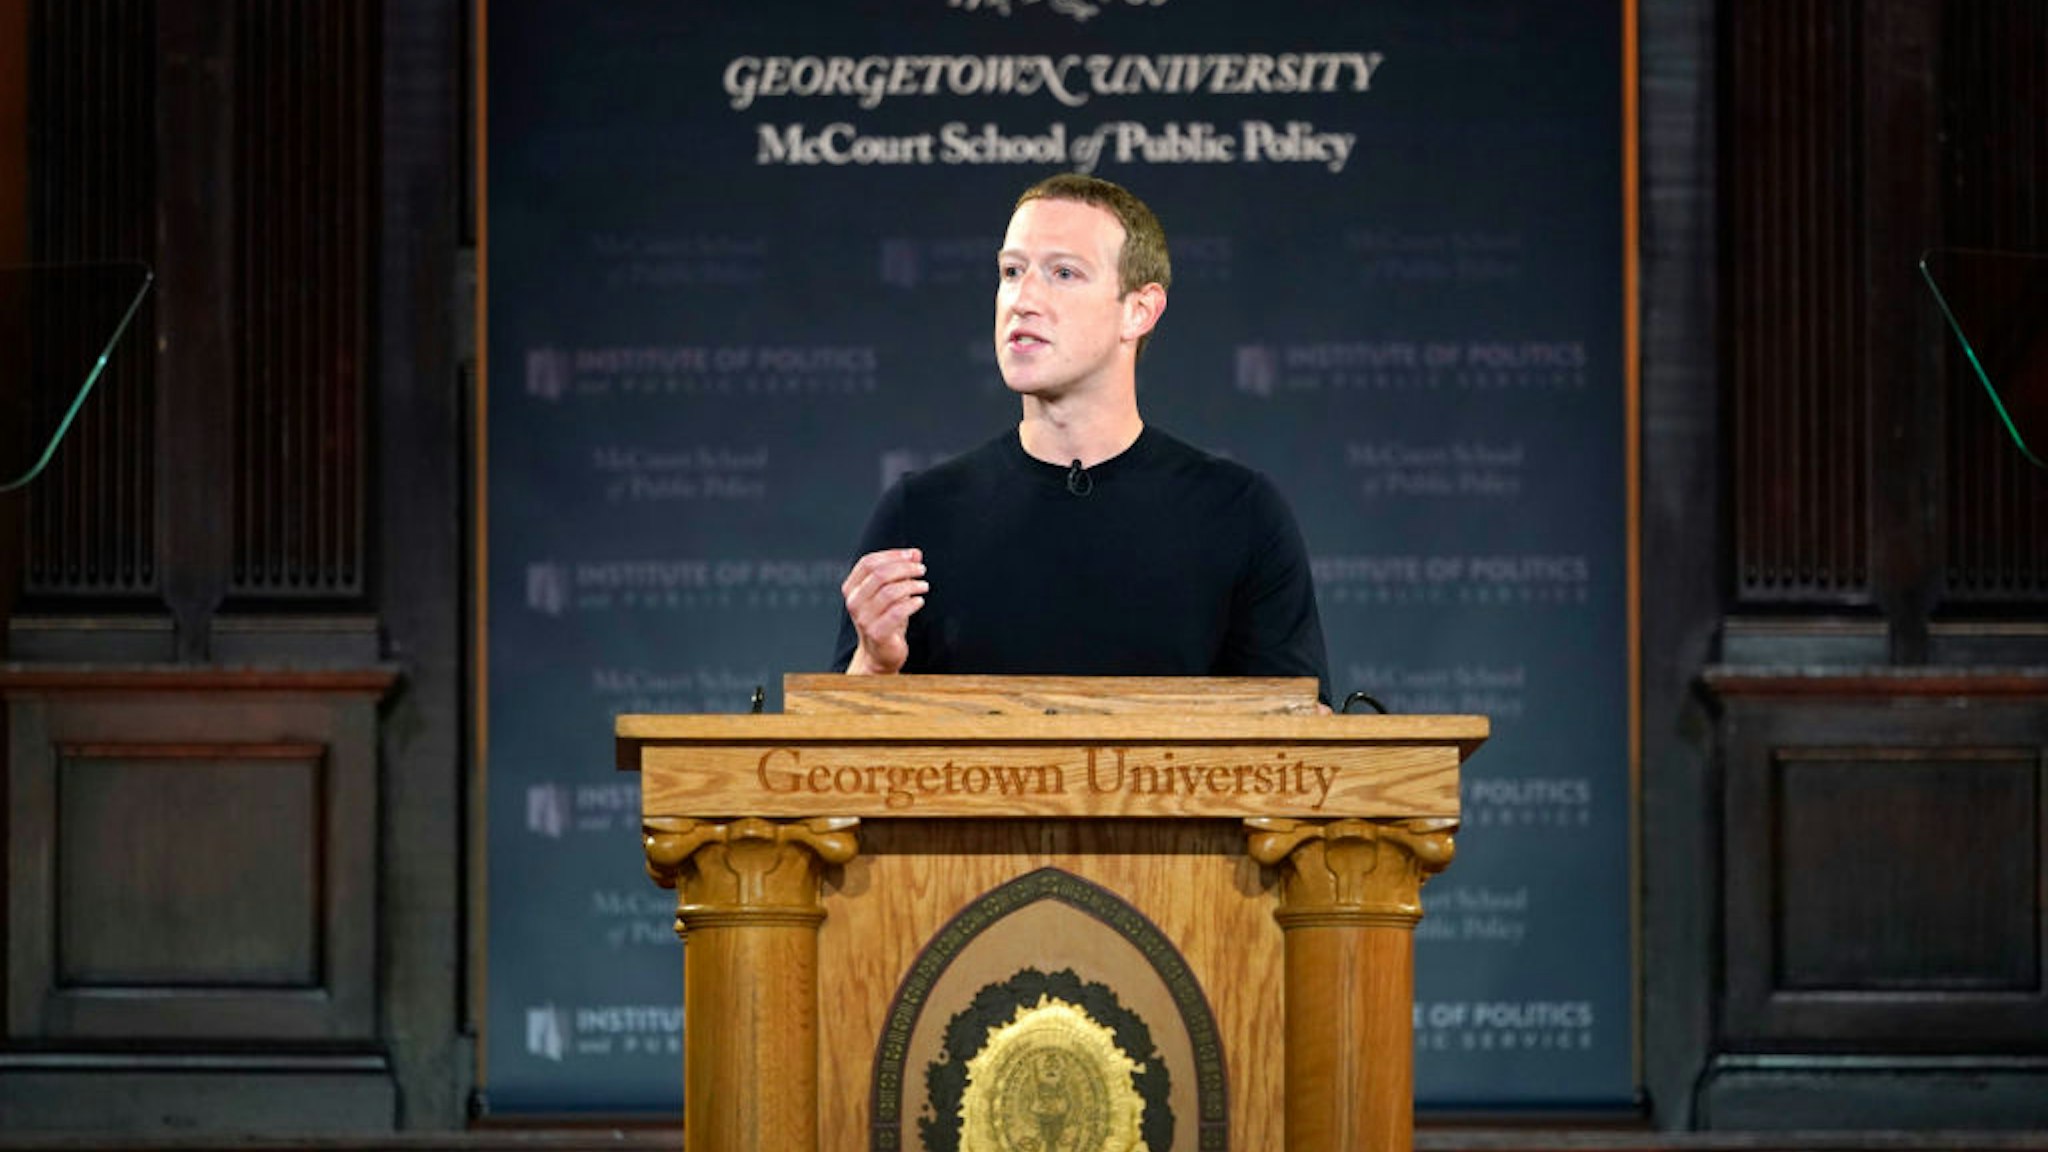 Facebook CEO Mark Zuckerberg leads a conversation on free expression at Georgetown University